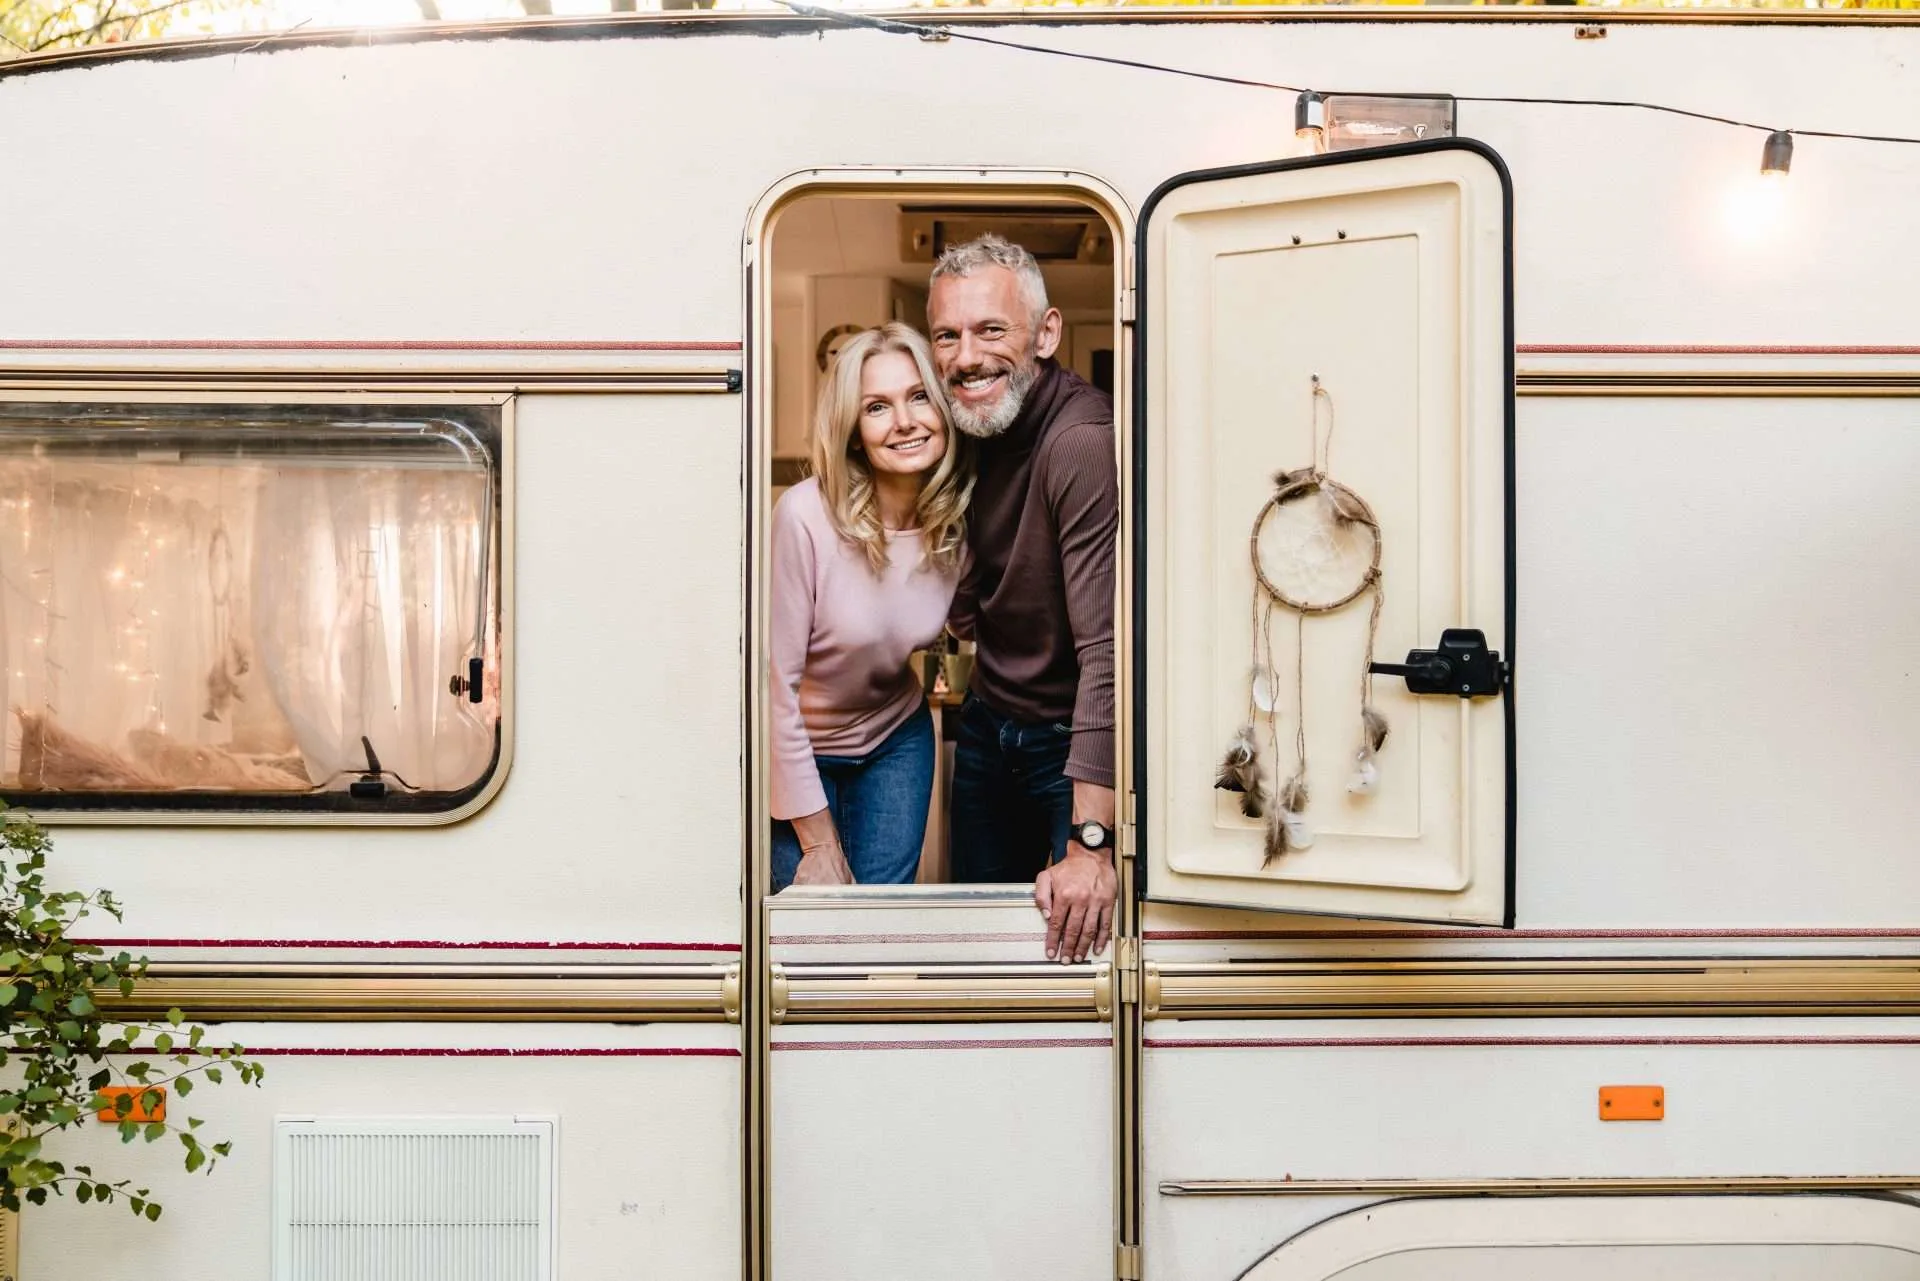 Older couple smiling in doorway of RV while moochdocking